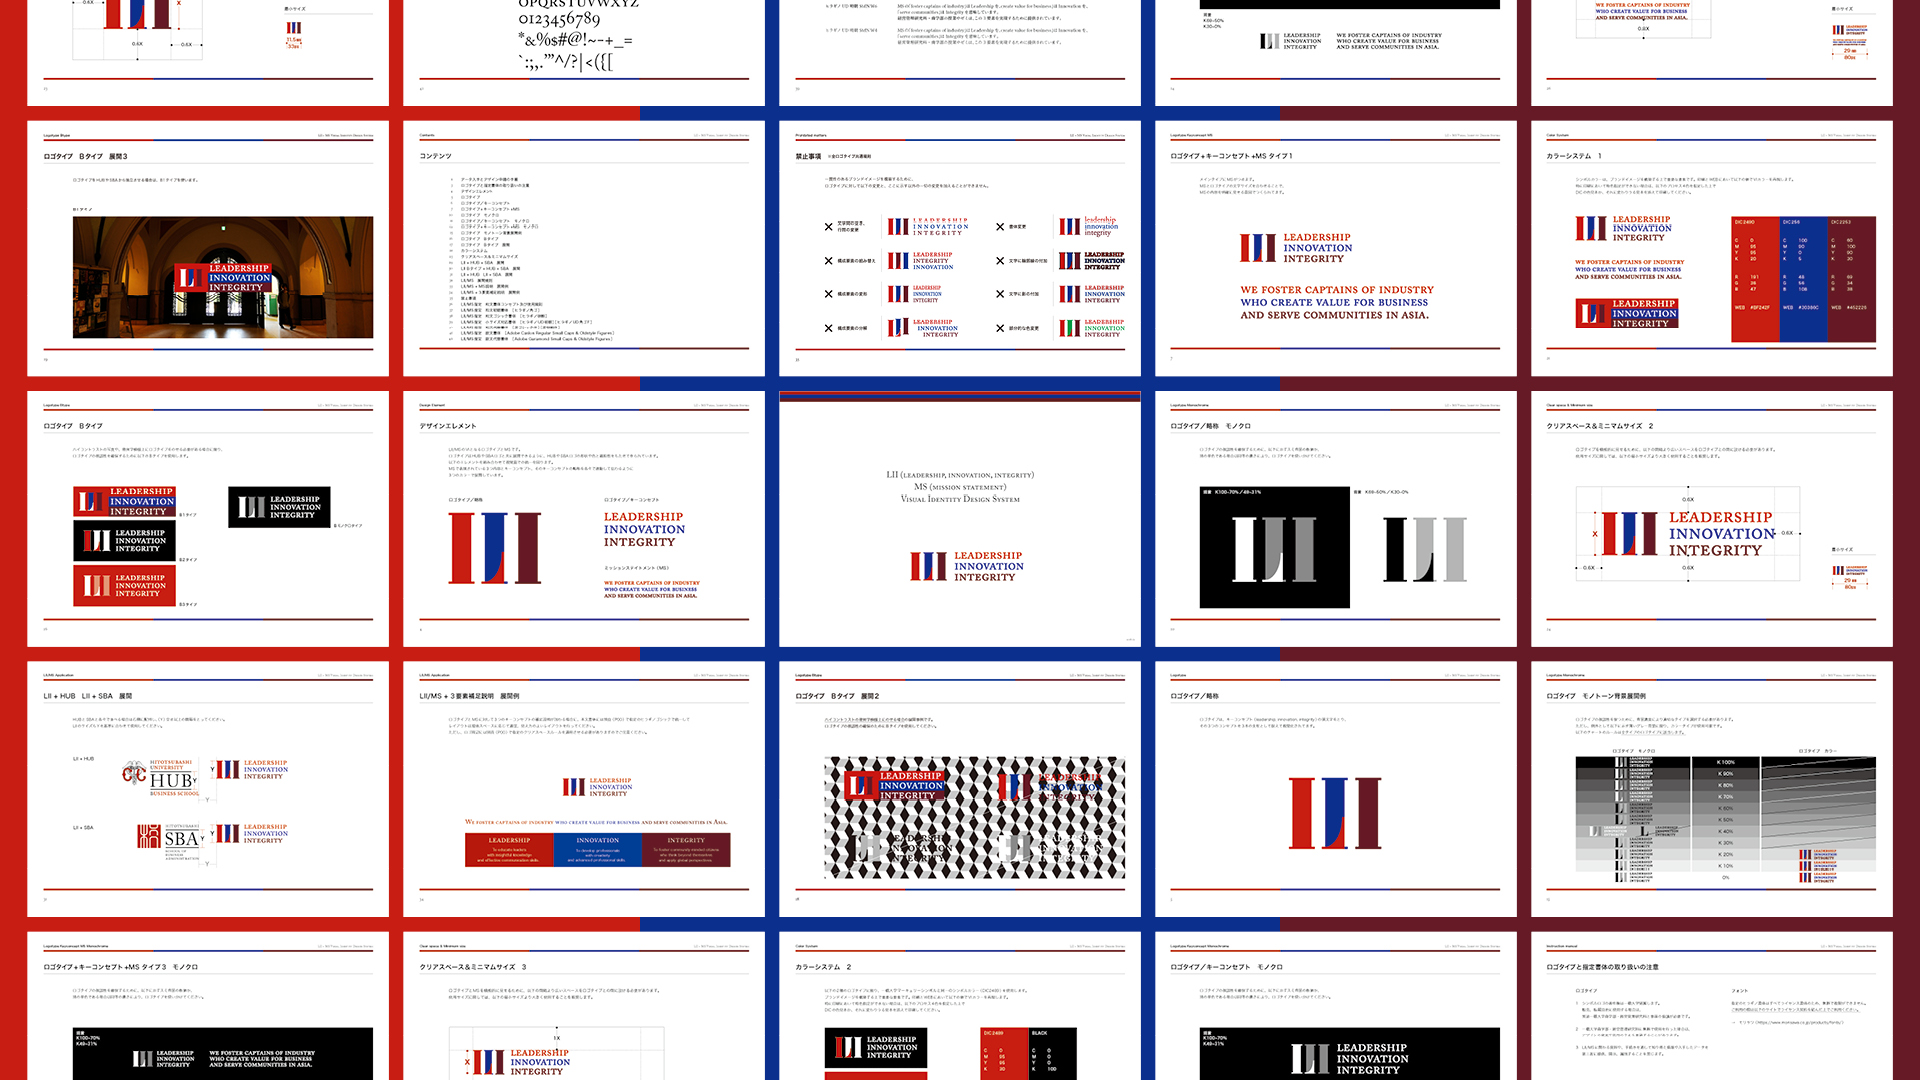 LII's Visual Identity Guidelines